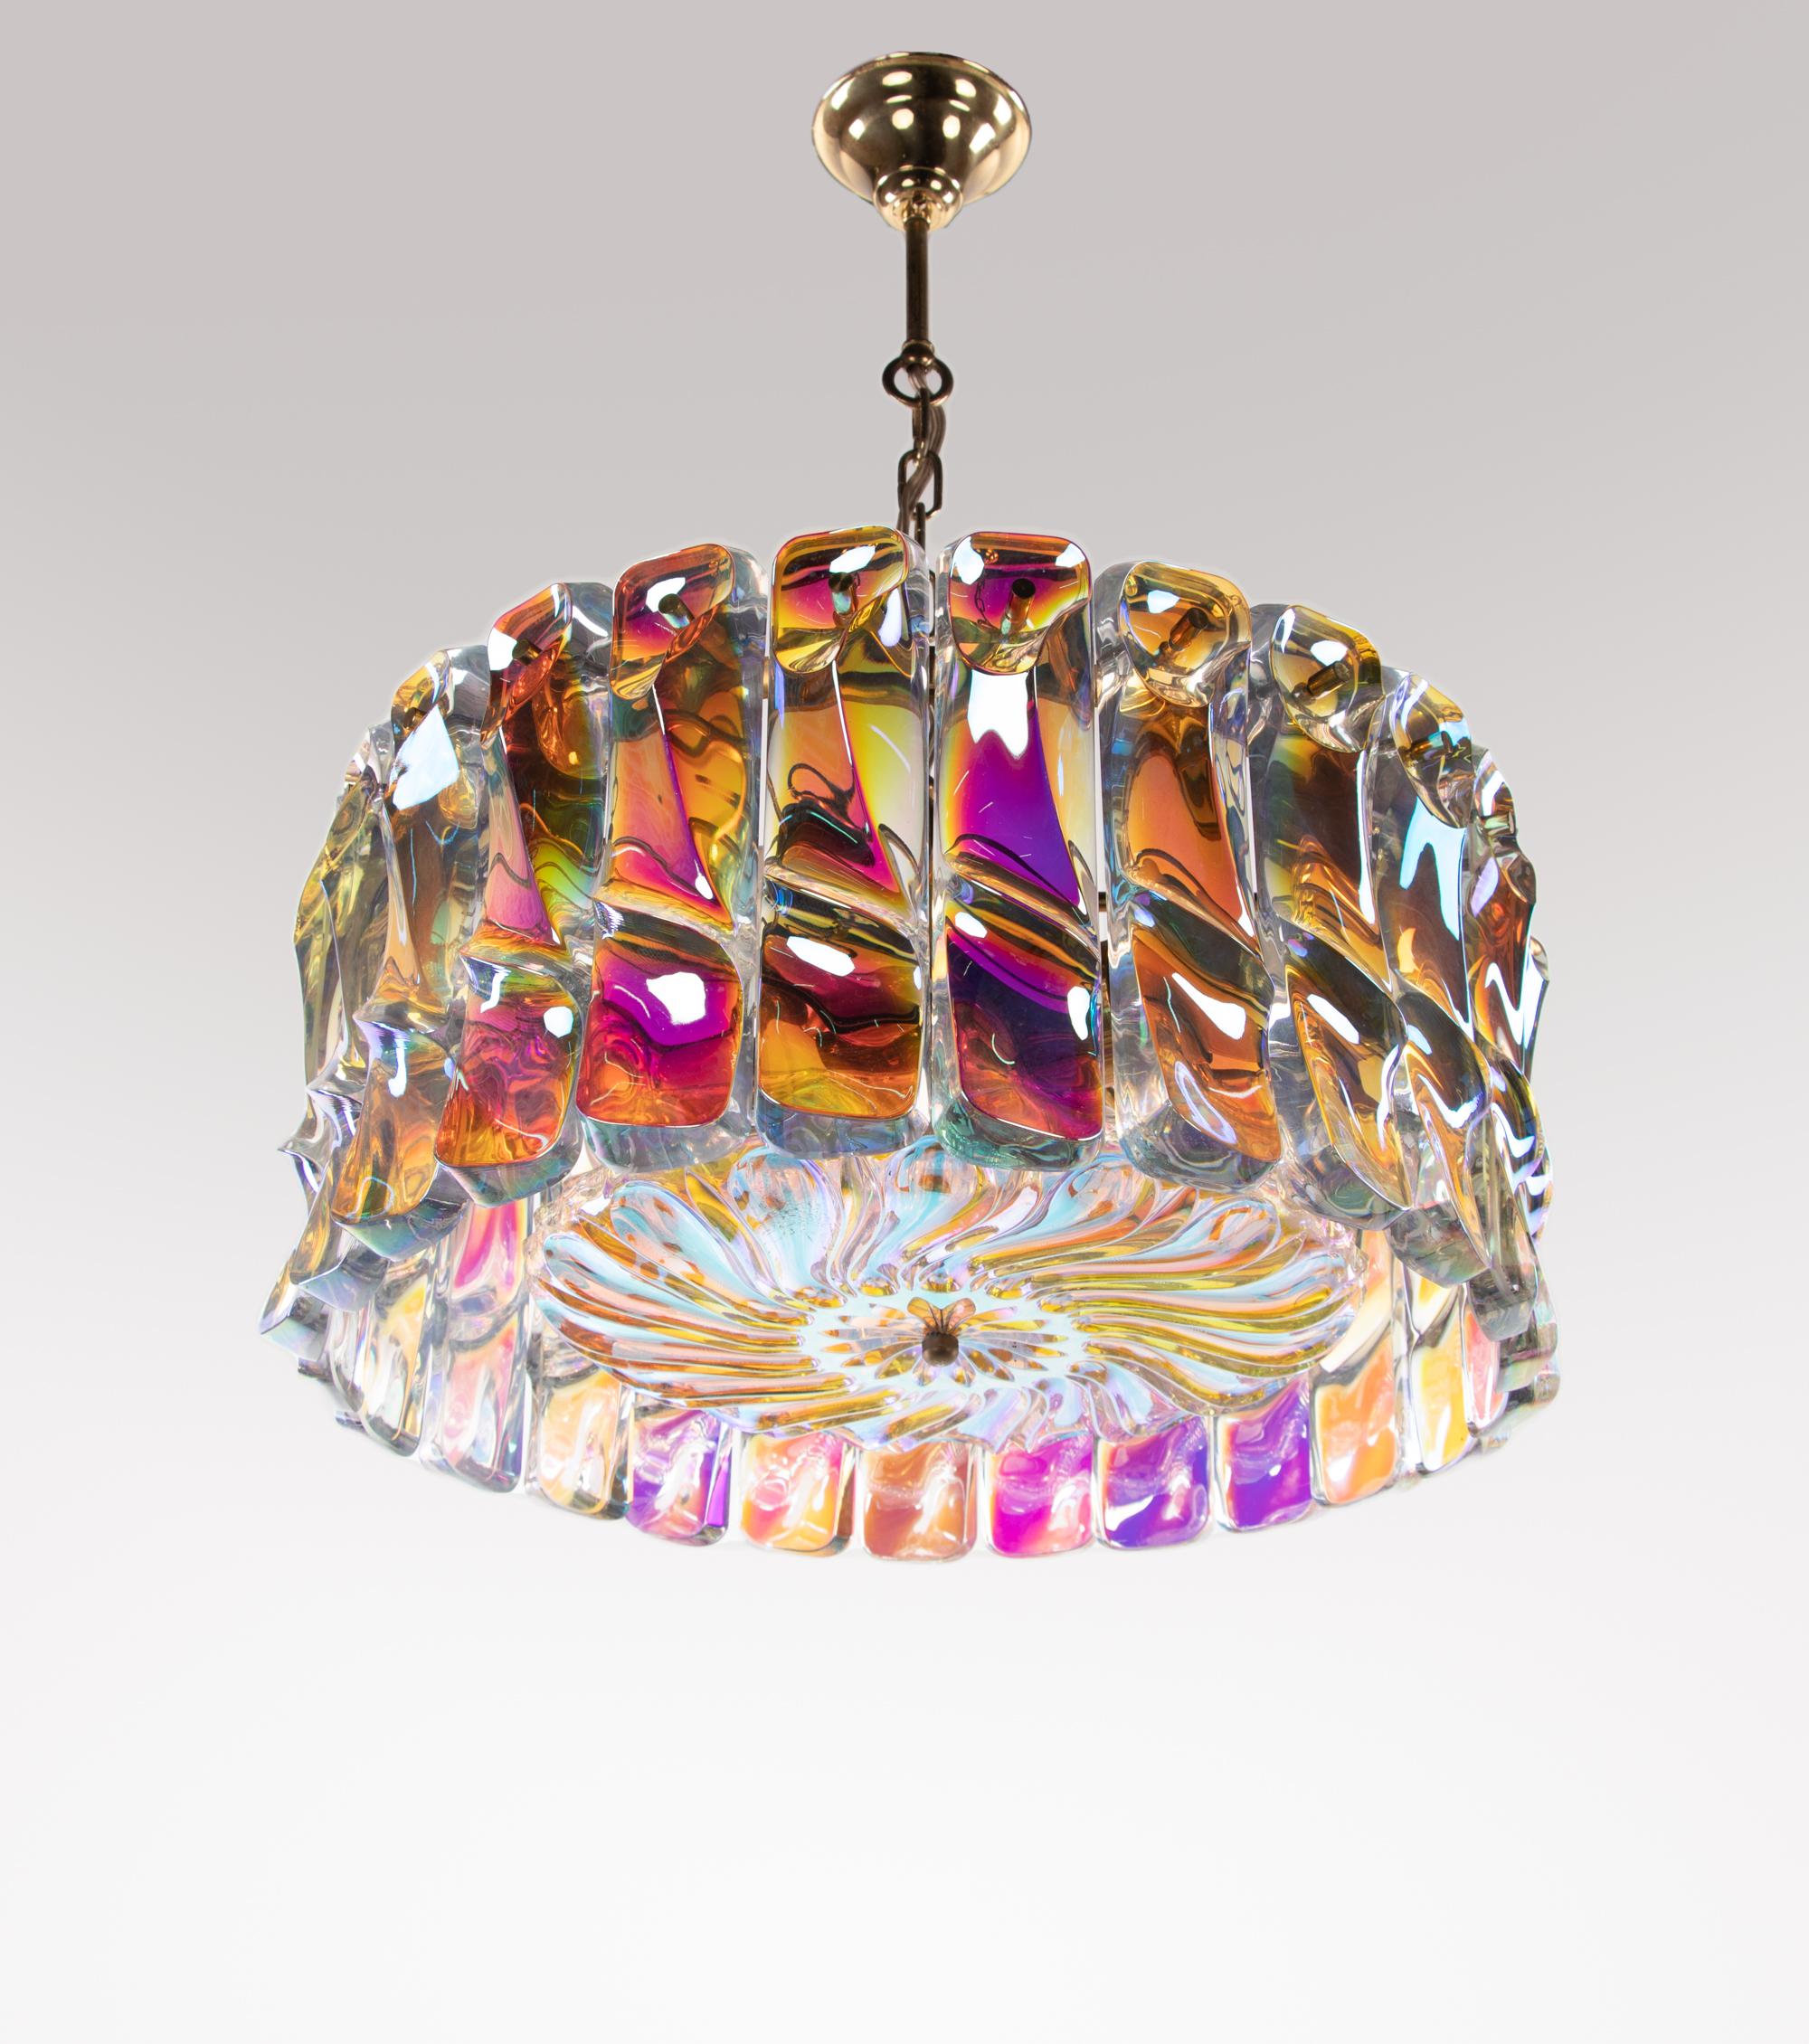 Glamurous and heavy chandelier with thick, handblown iridescent glass rectangles hanging from brass frame.

Measures: diameter 18